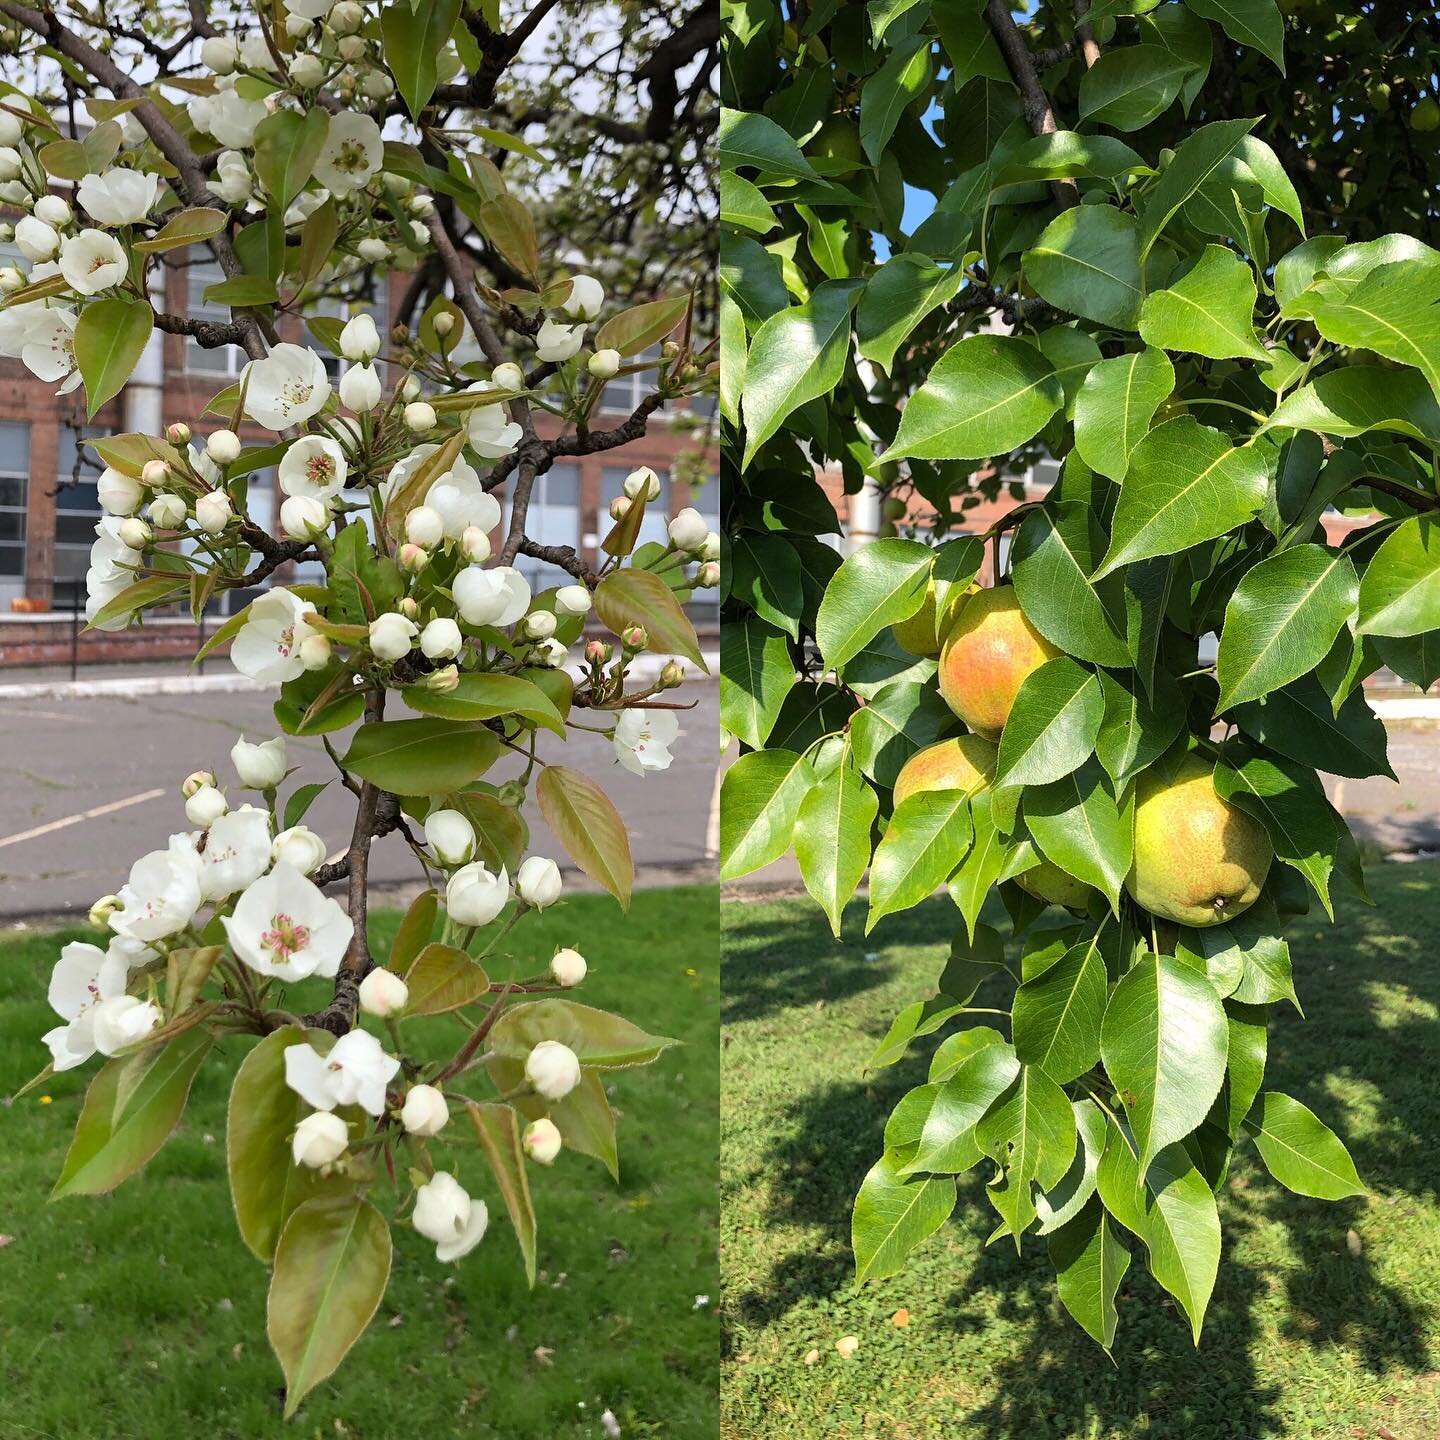 The pear tree at Electric Works has been blooming every year, with or without anyone around to harvest its fruit.